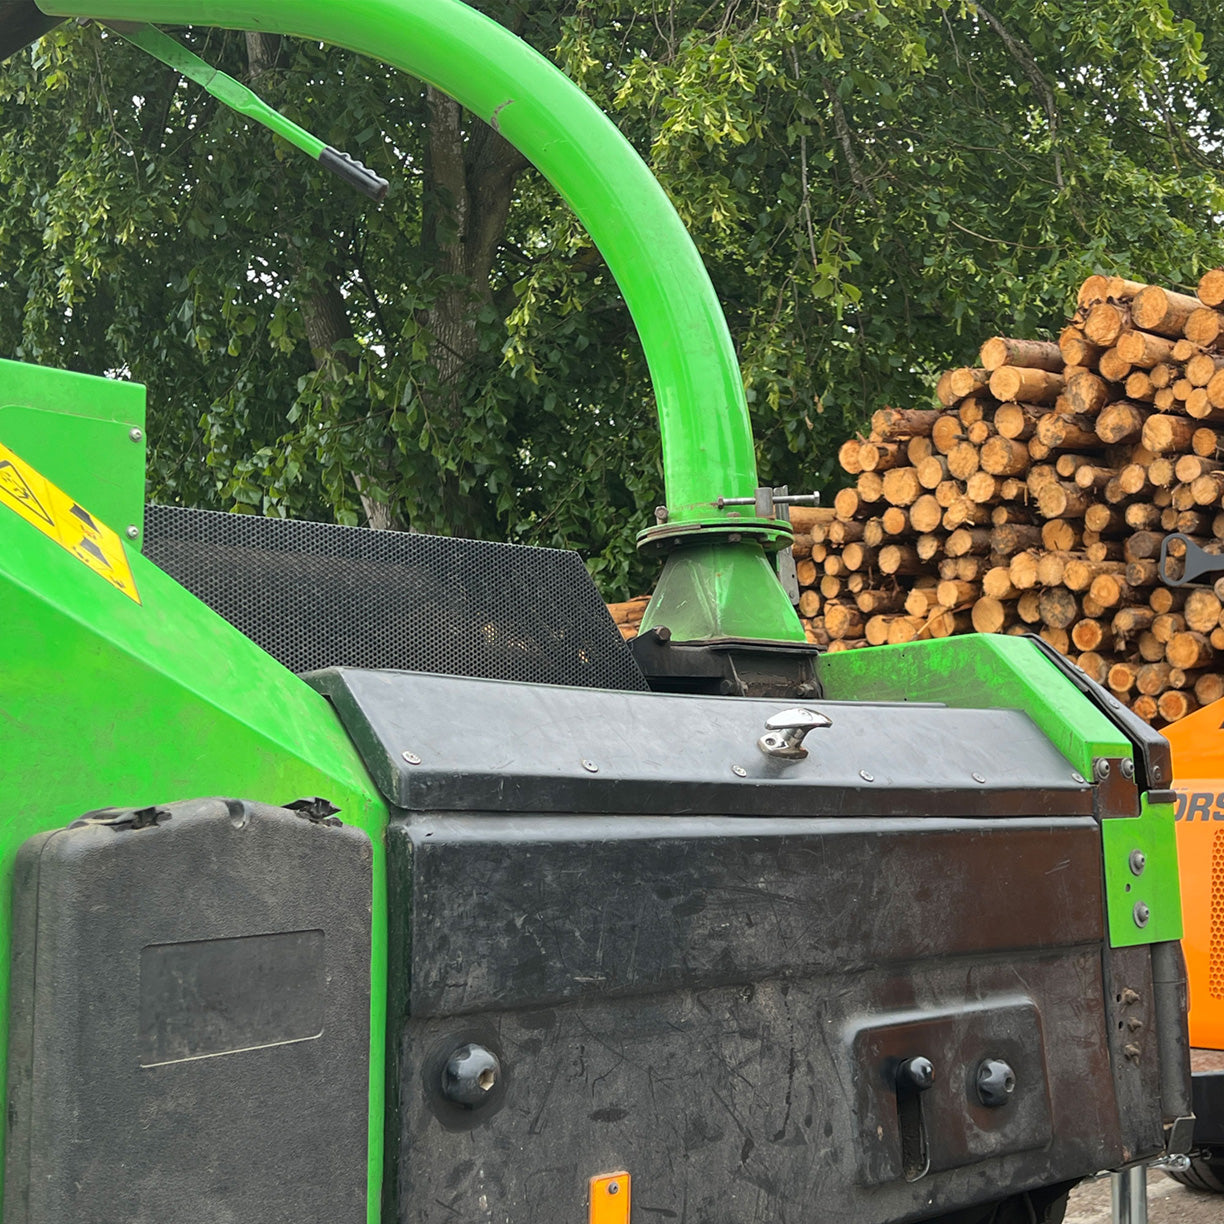 Used as-is woodchippers